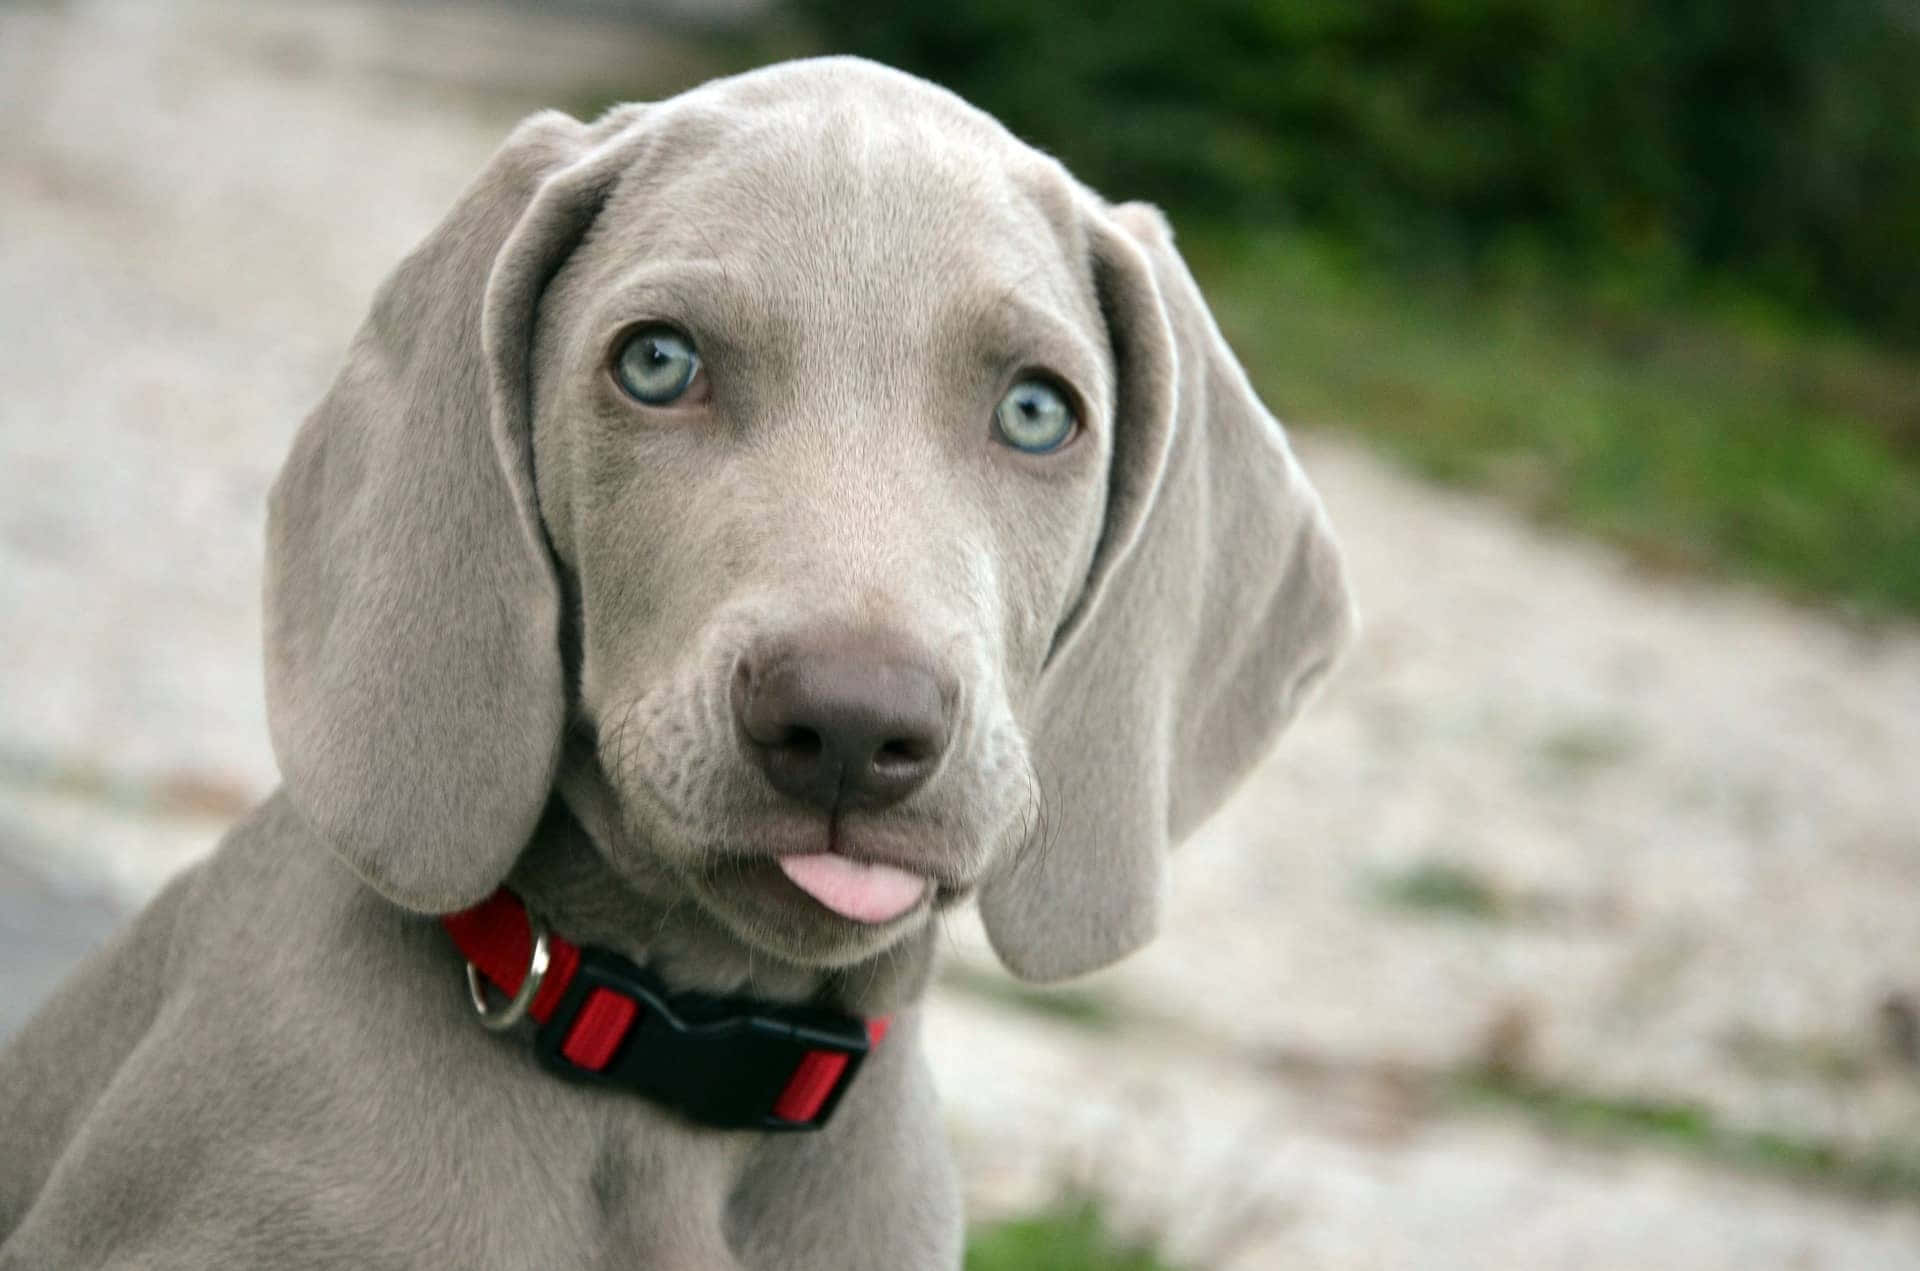 Adorable Weimaraner Puppy Ready for Fetch